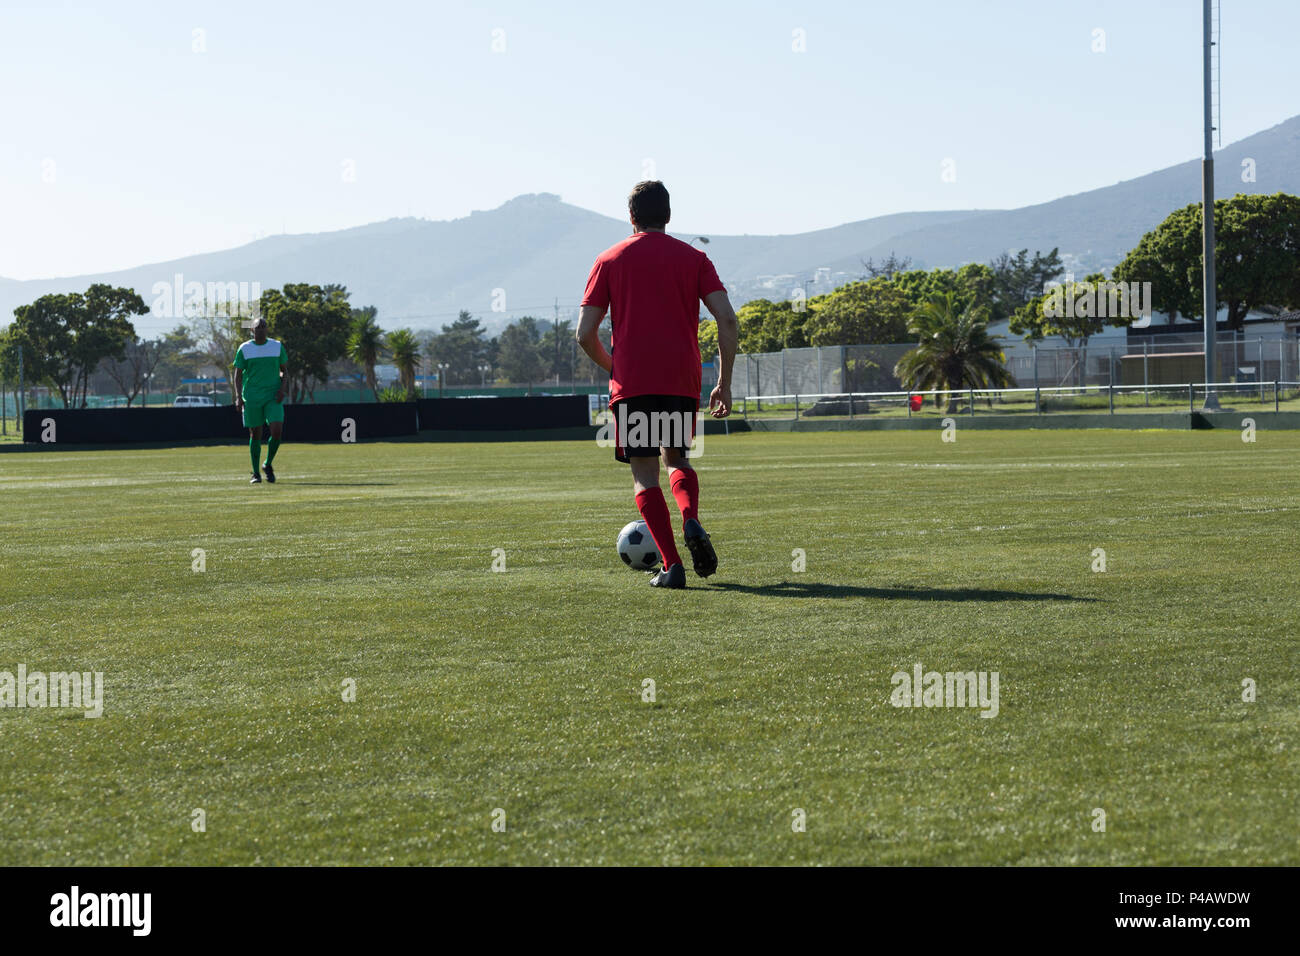 Player playing football soccer game Stock Photo